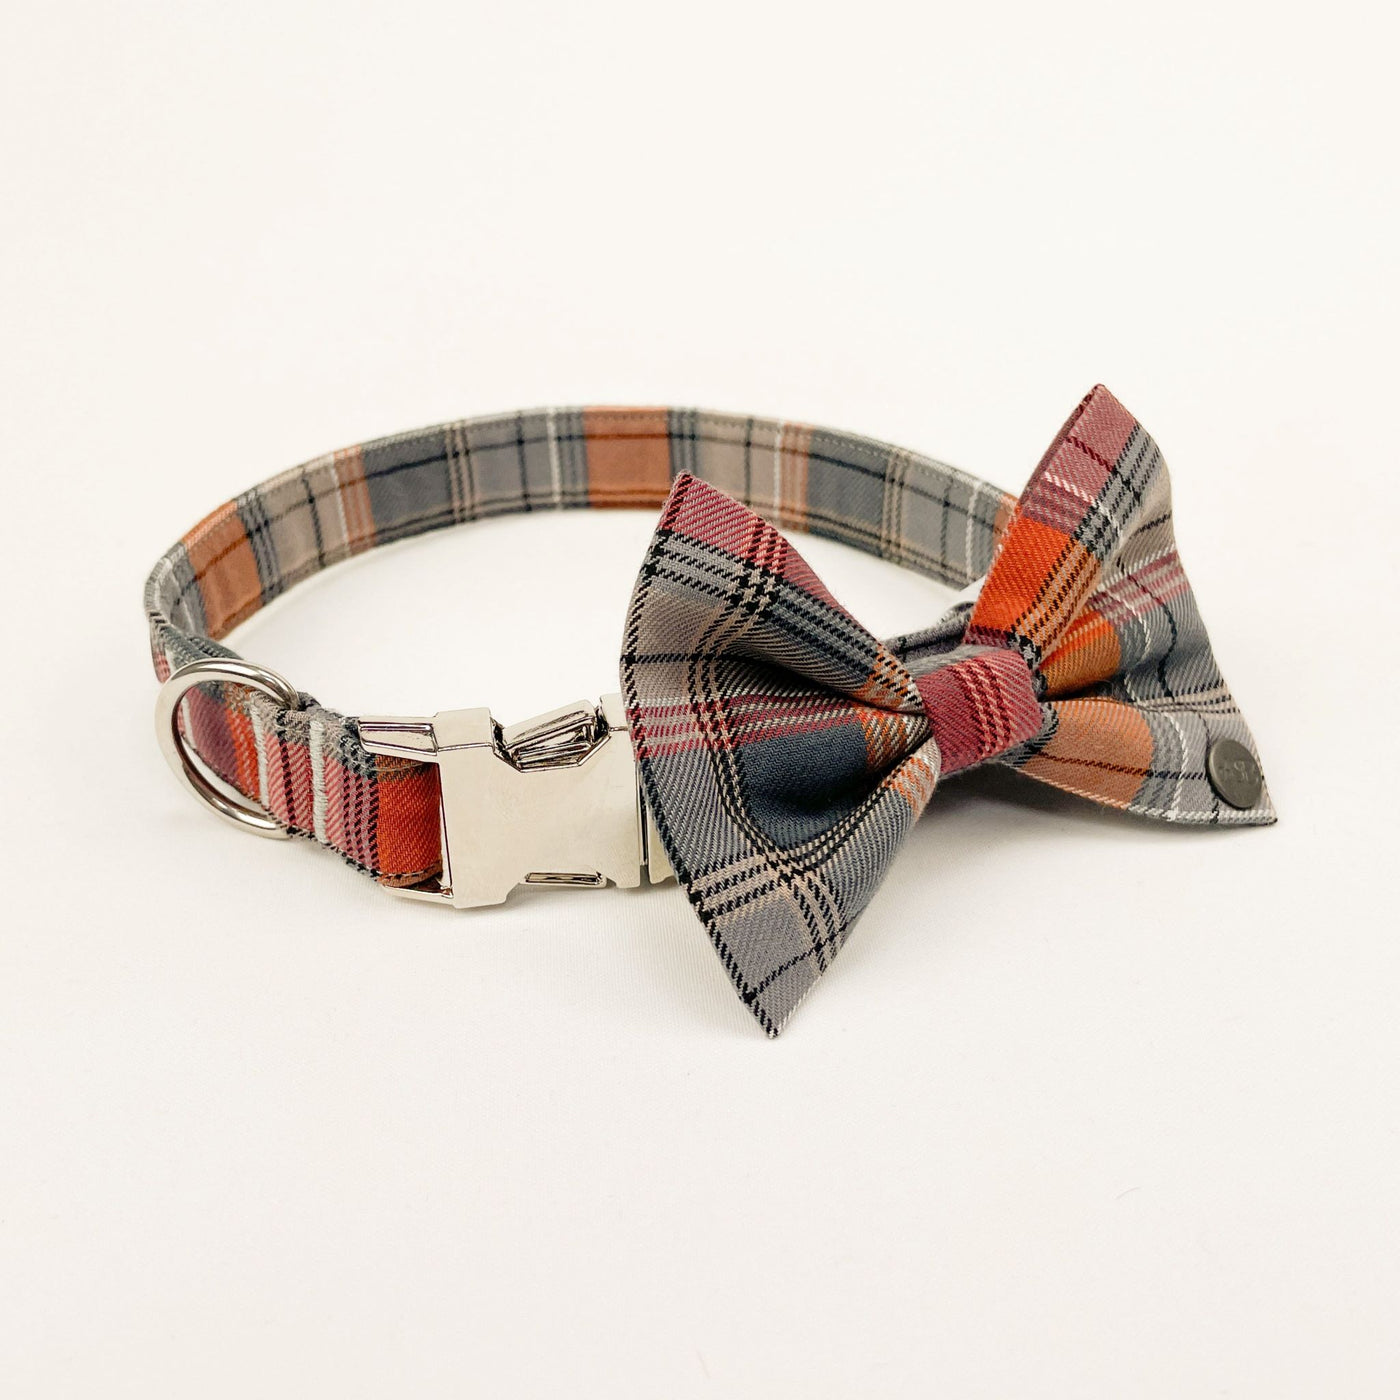 Grey and orange autumn check dog collar and matching dog bow tie accessory.